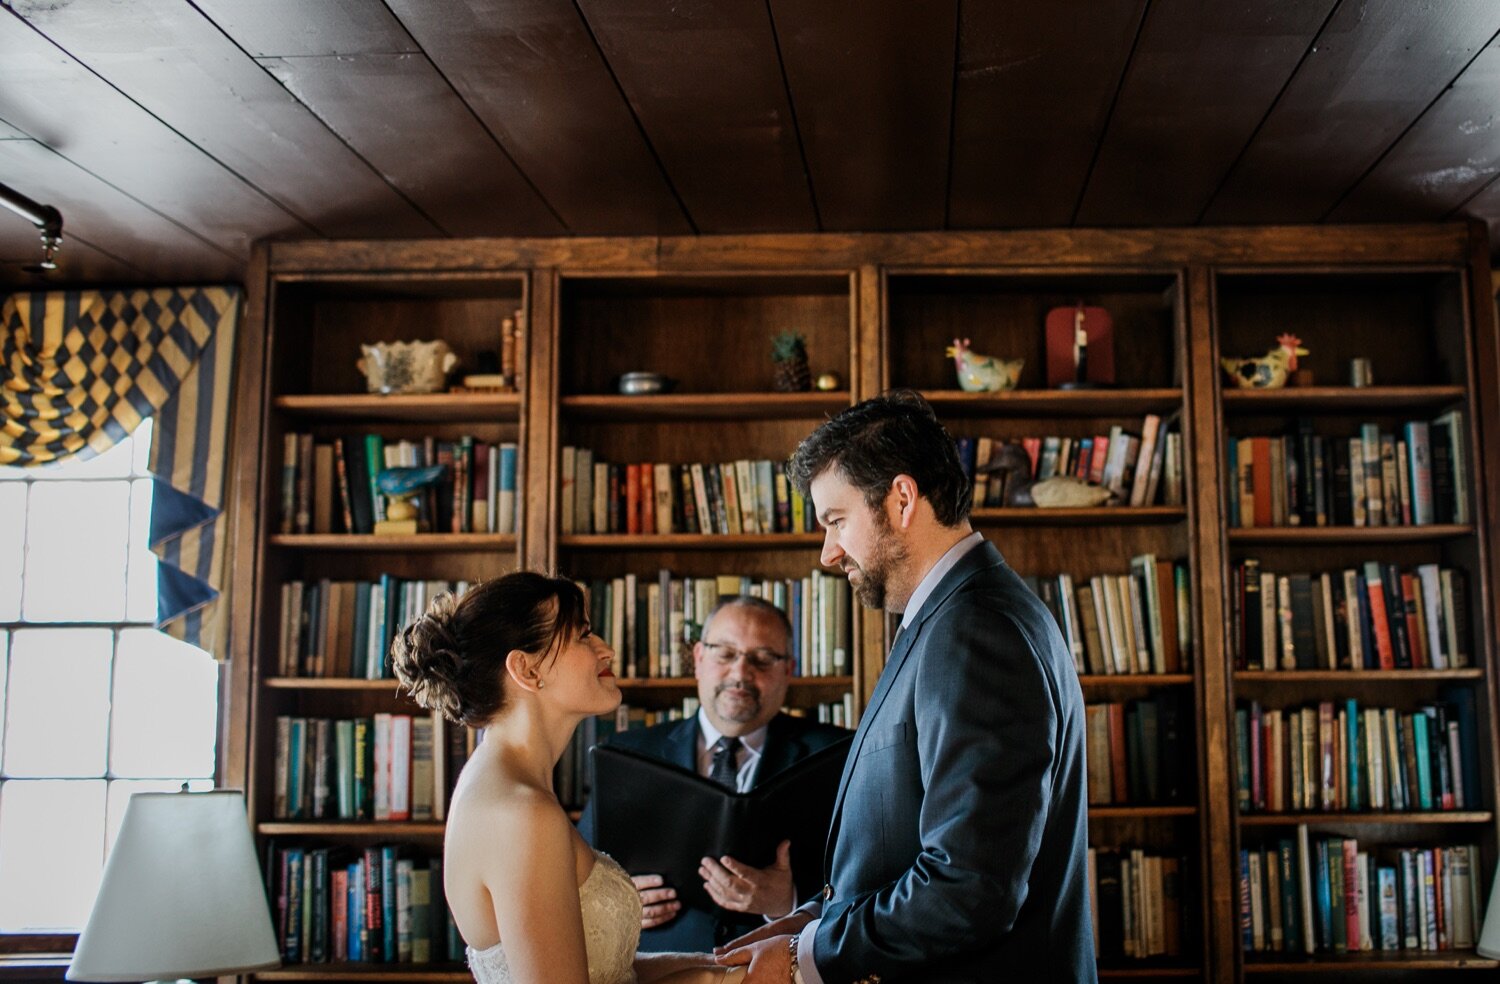 05_Intimate elopement ceremony at the Beekman Arms in Rhinebeck NY.jpg